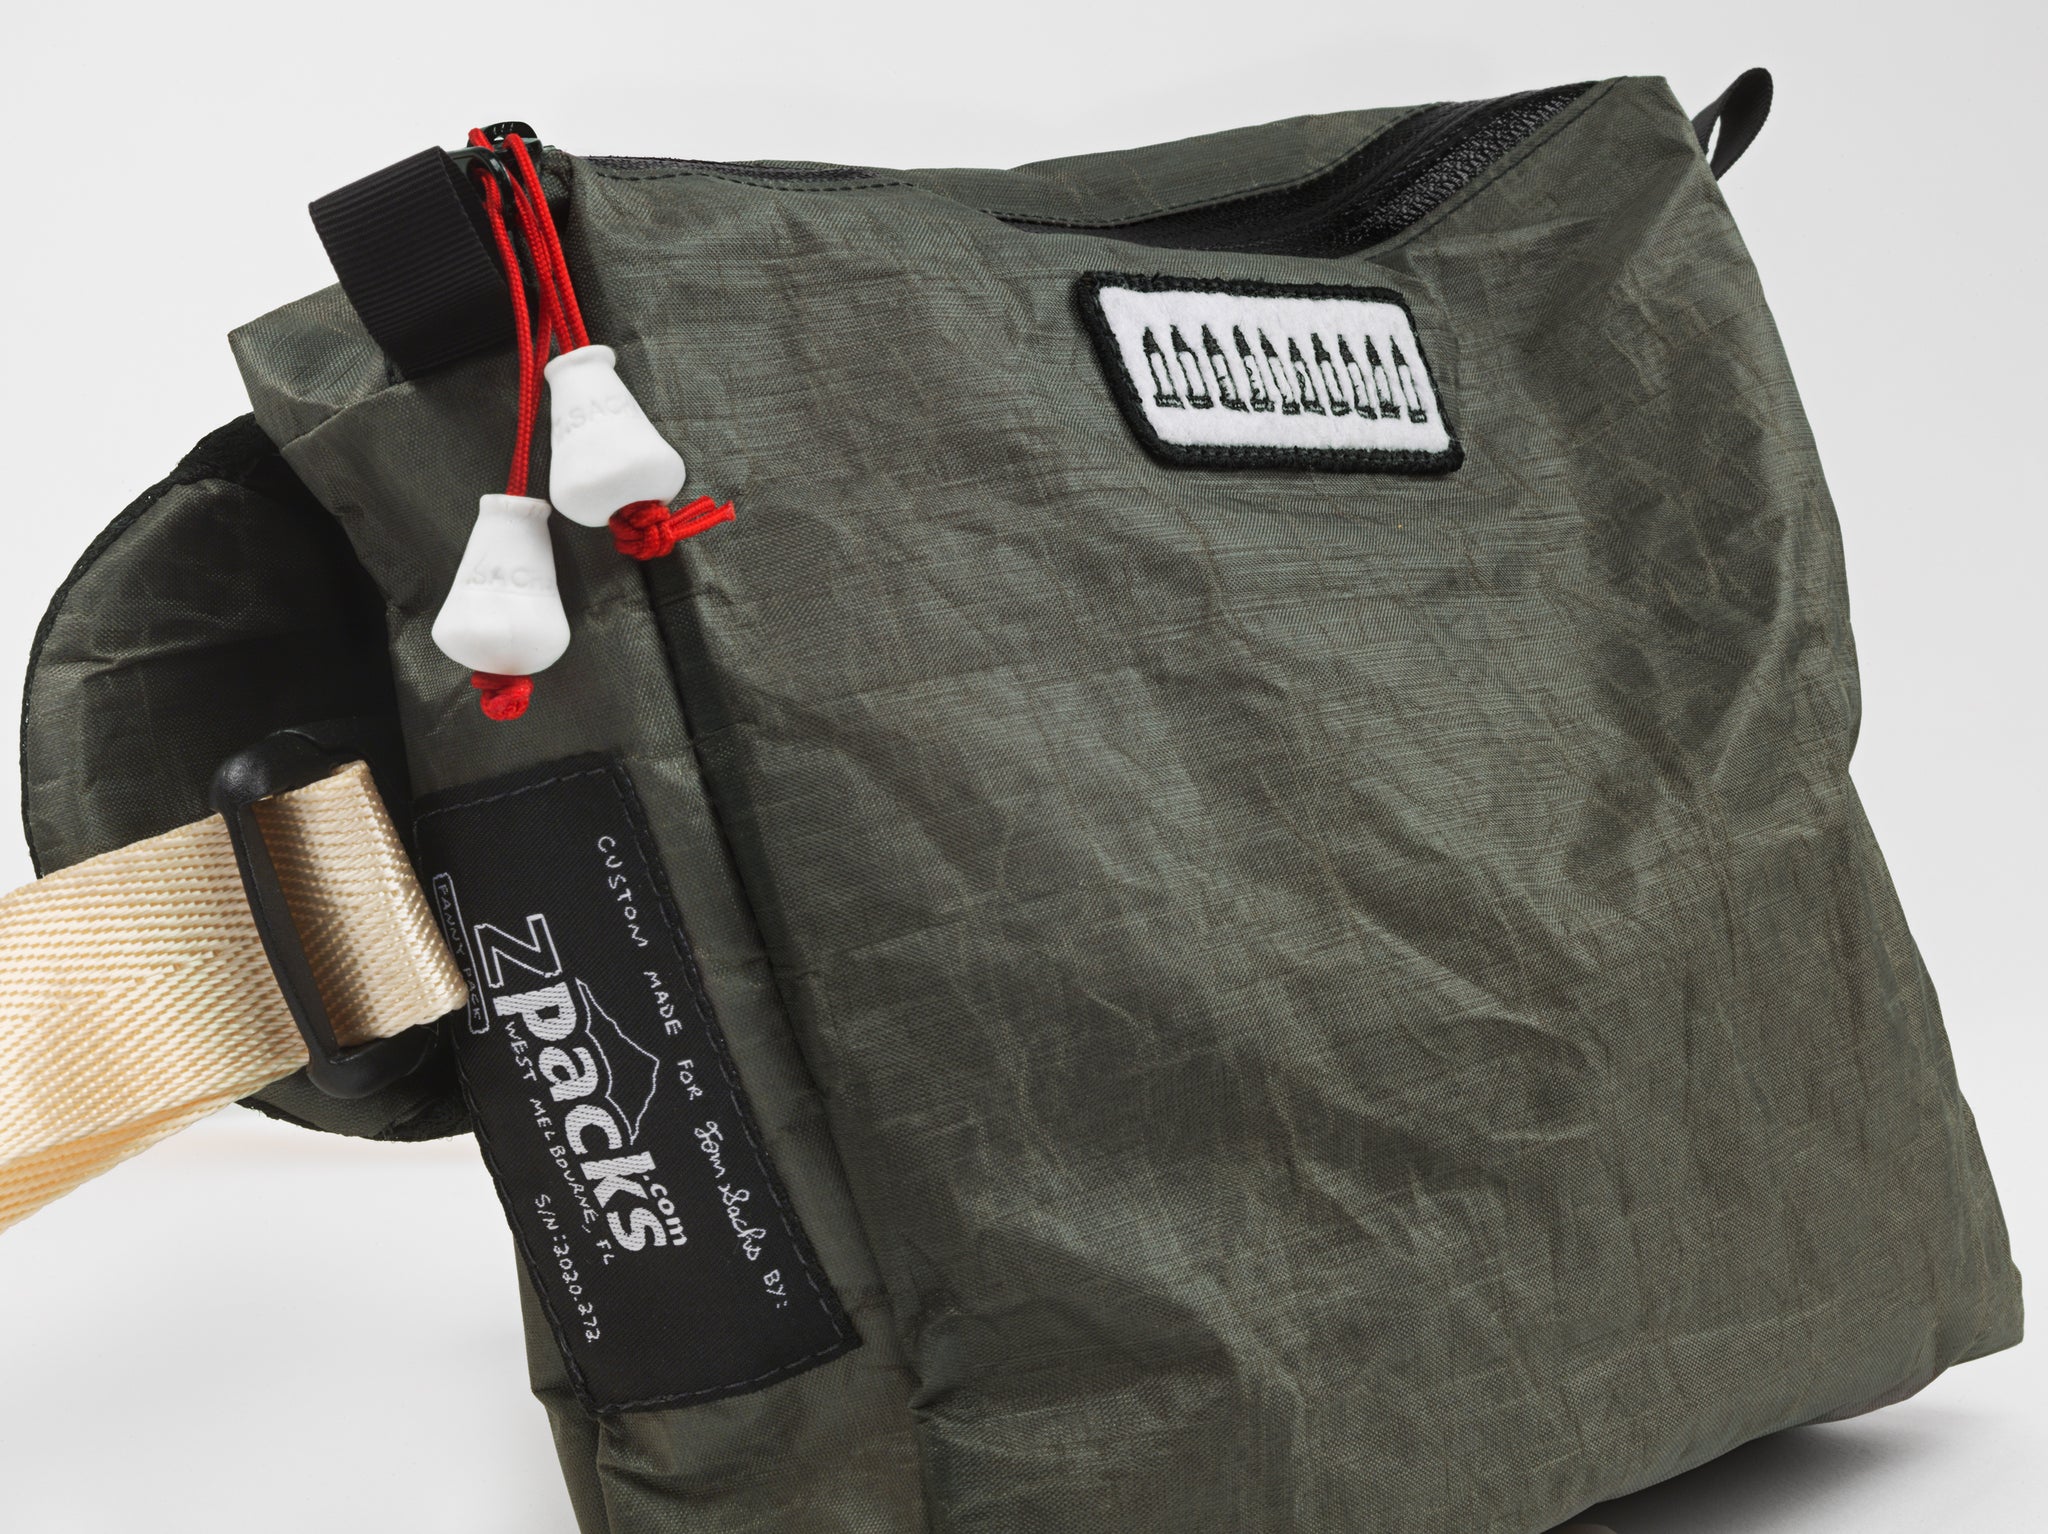 Fanny Pack Second Edition (Olive Drab) – Tom Sachs Store